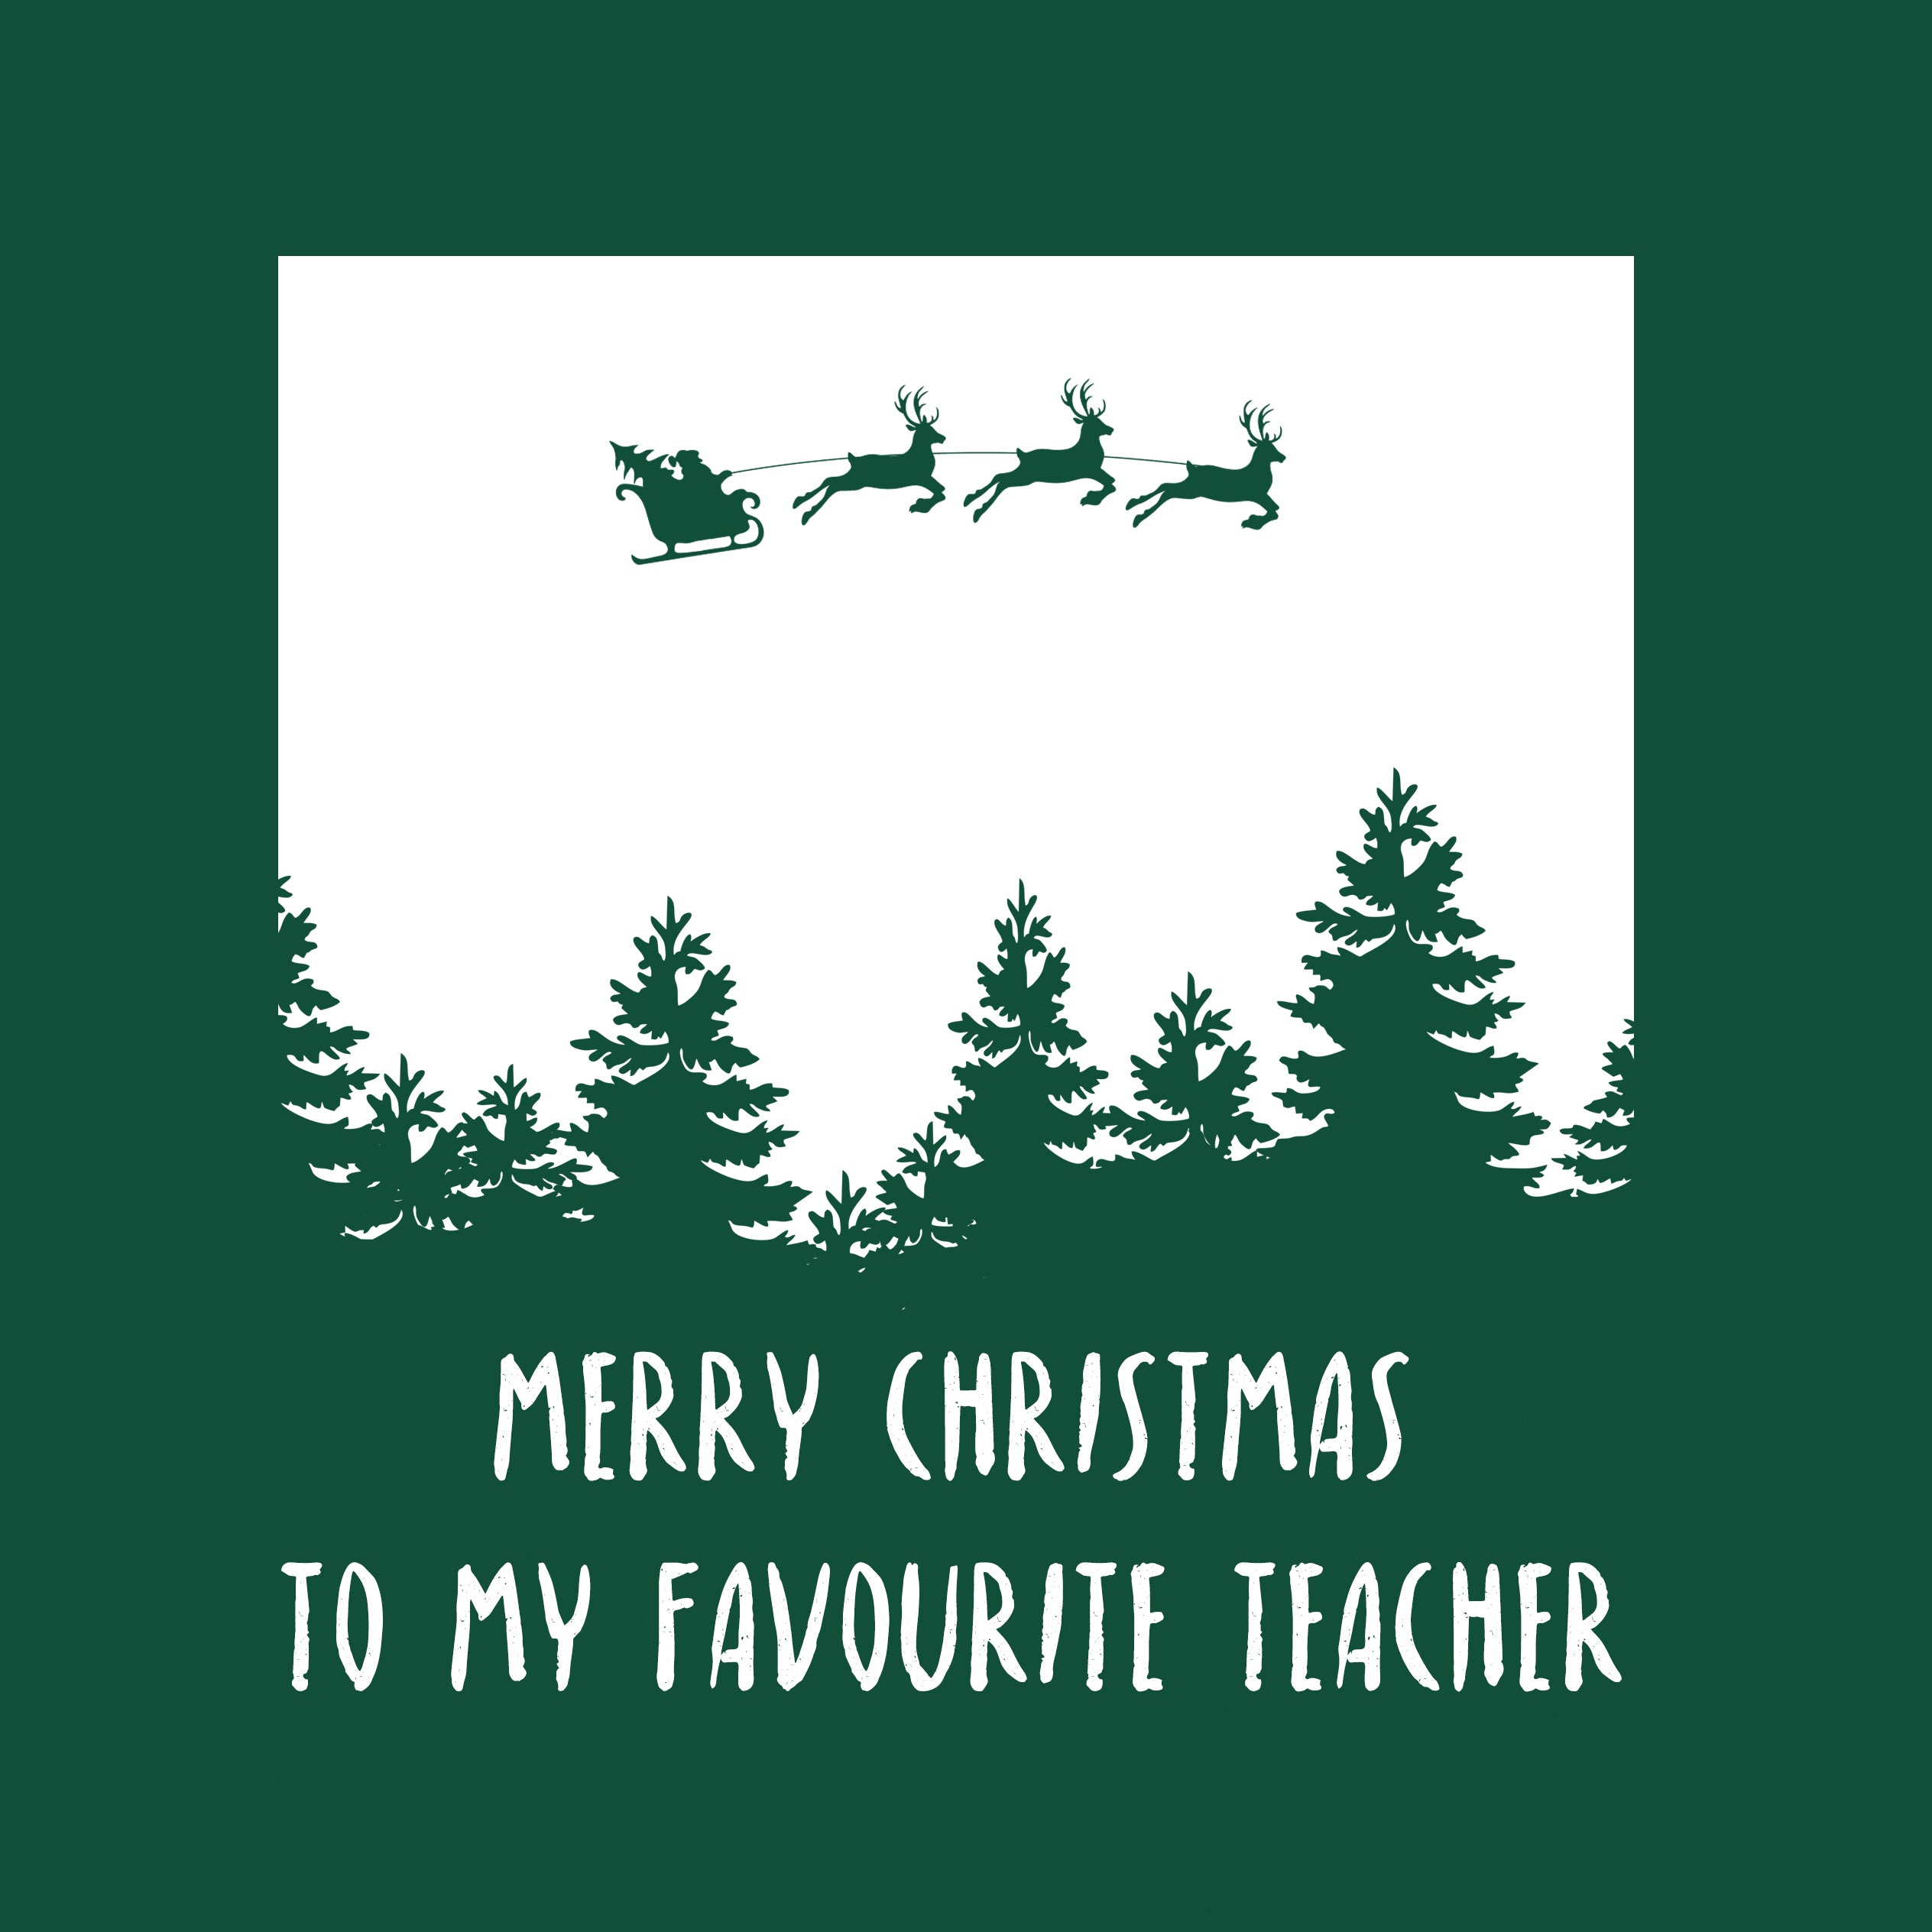 Christmas Cards For Students: Notes From the Teacher